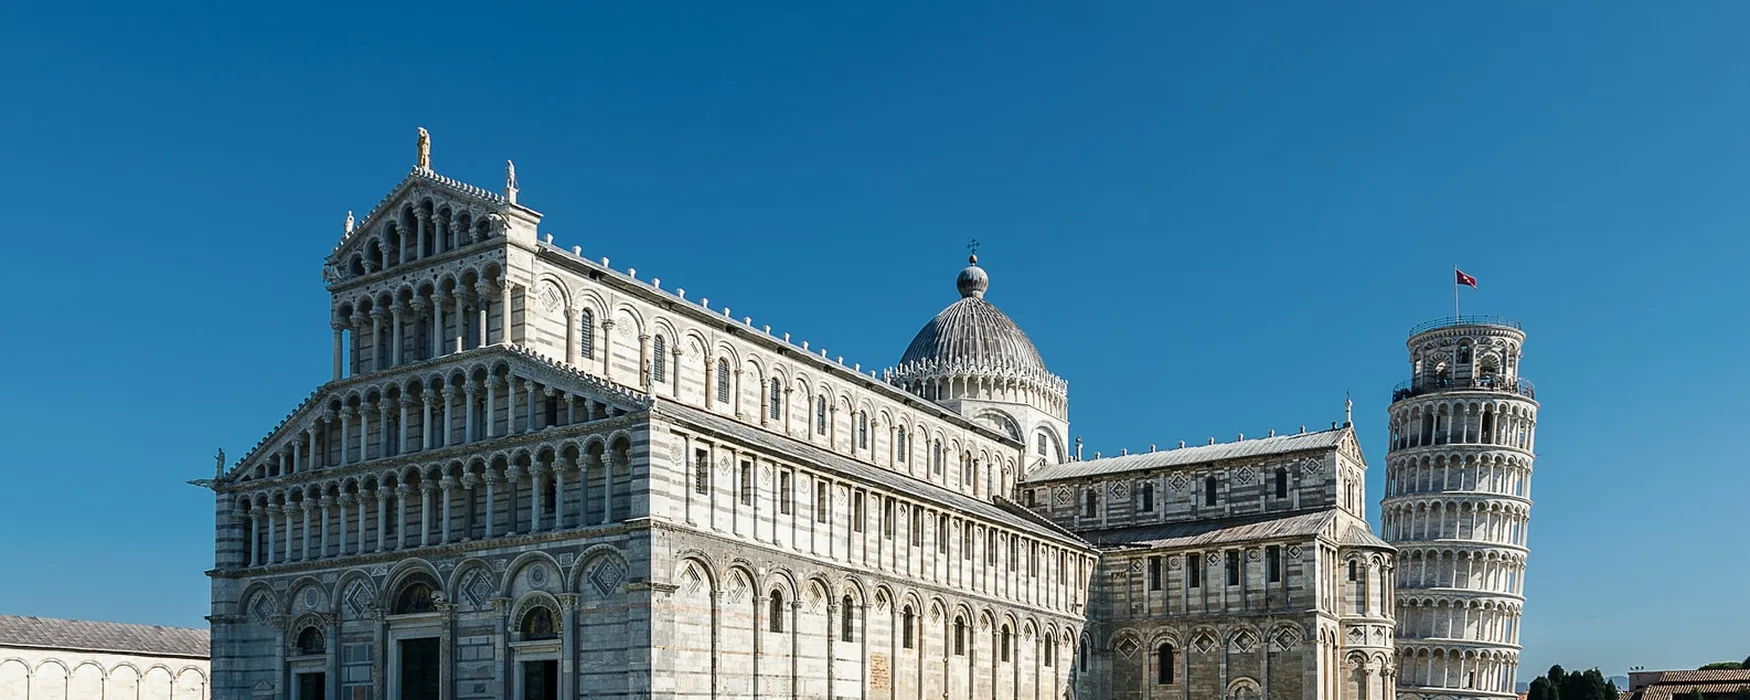 Discover Pisa from this exclusive, private rooftop garden